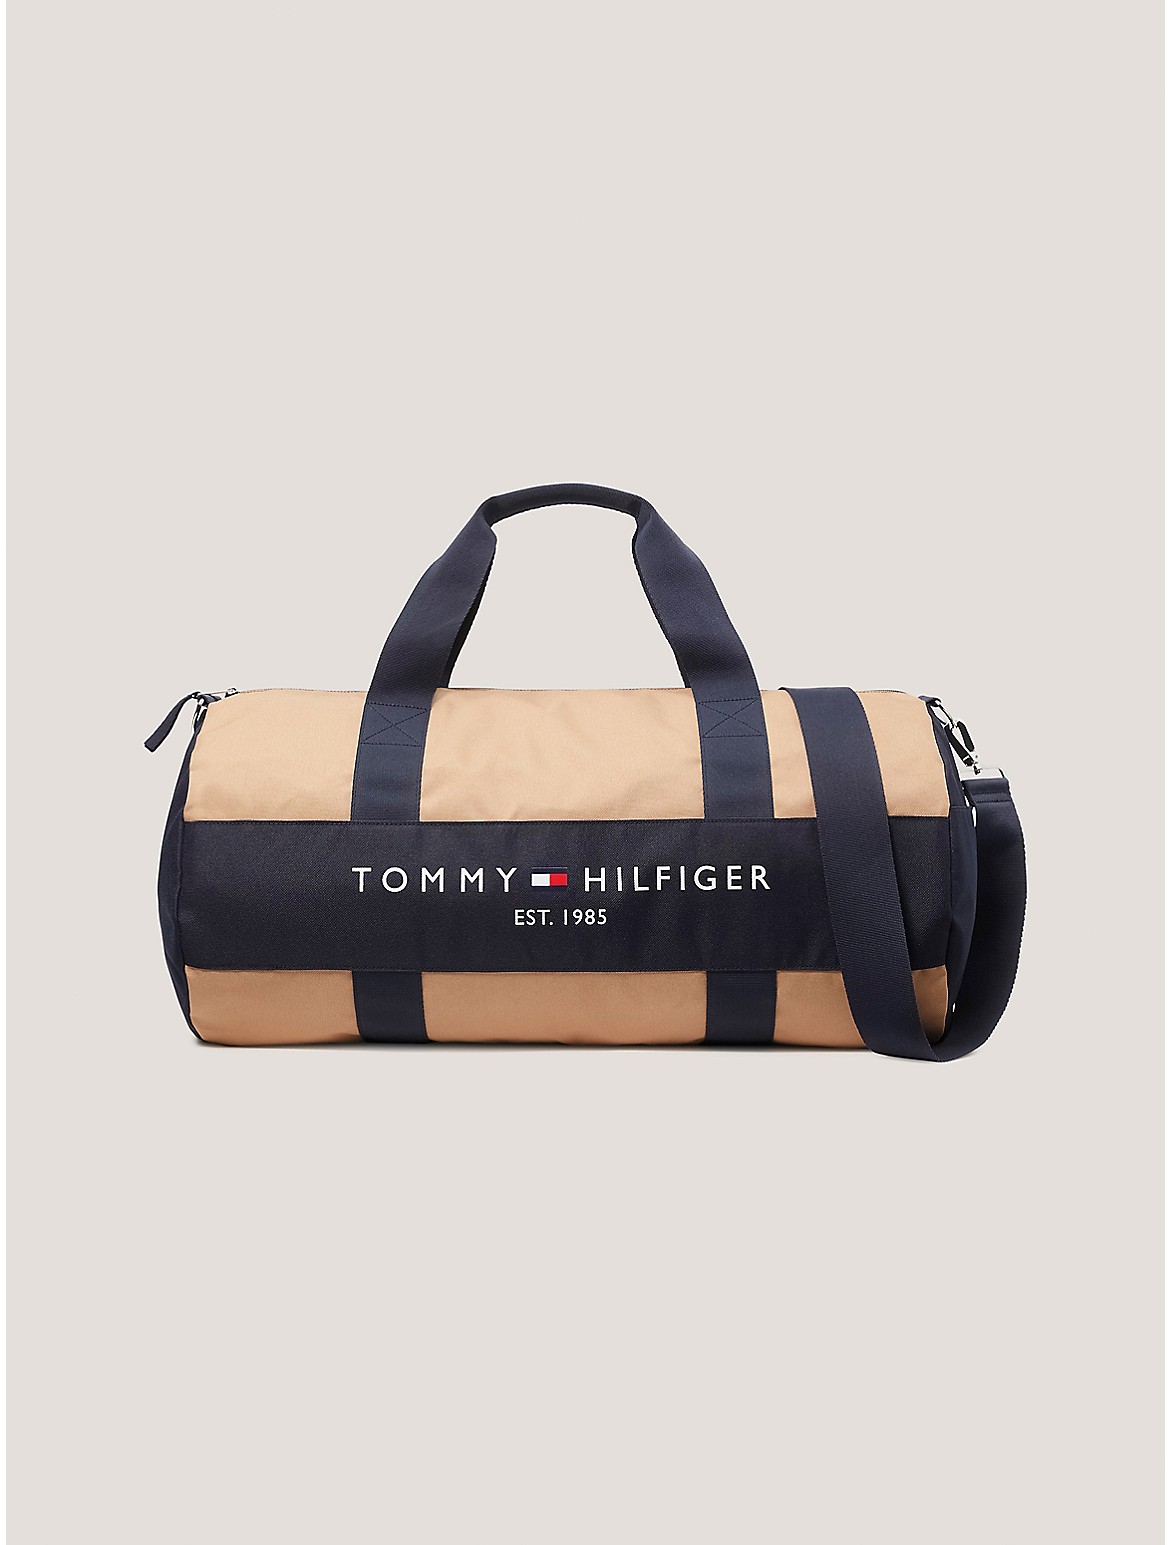 syndrom Undvigende historie Tommy Hilfiger Tommy Logo Duffle Bag In Countryside Khaki/navy | ModeSens